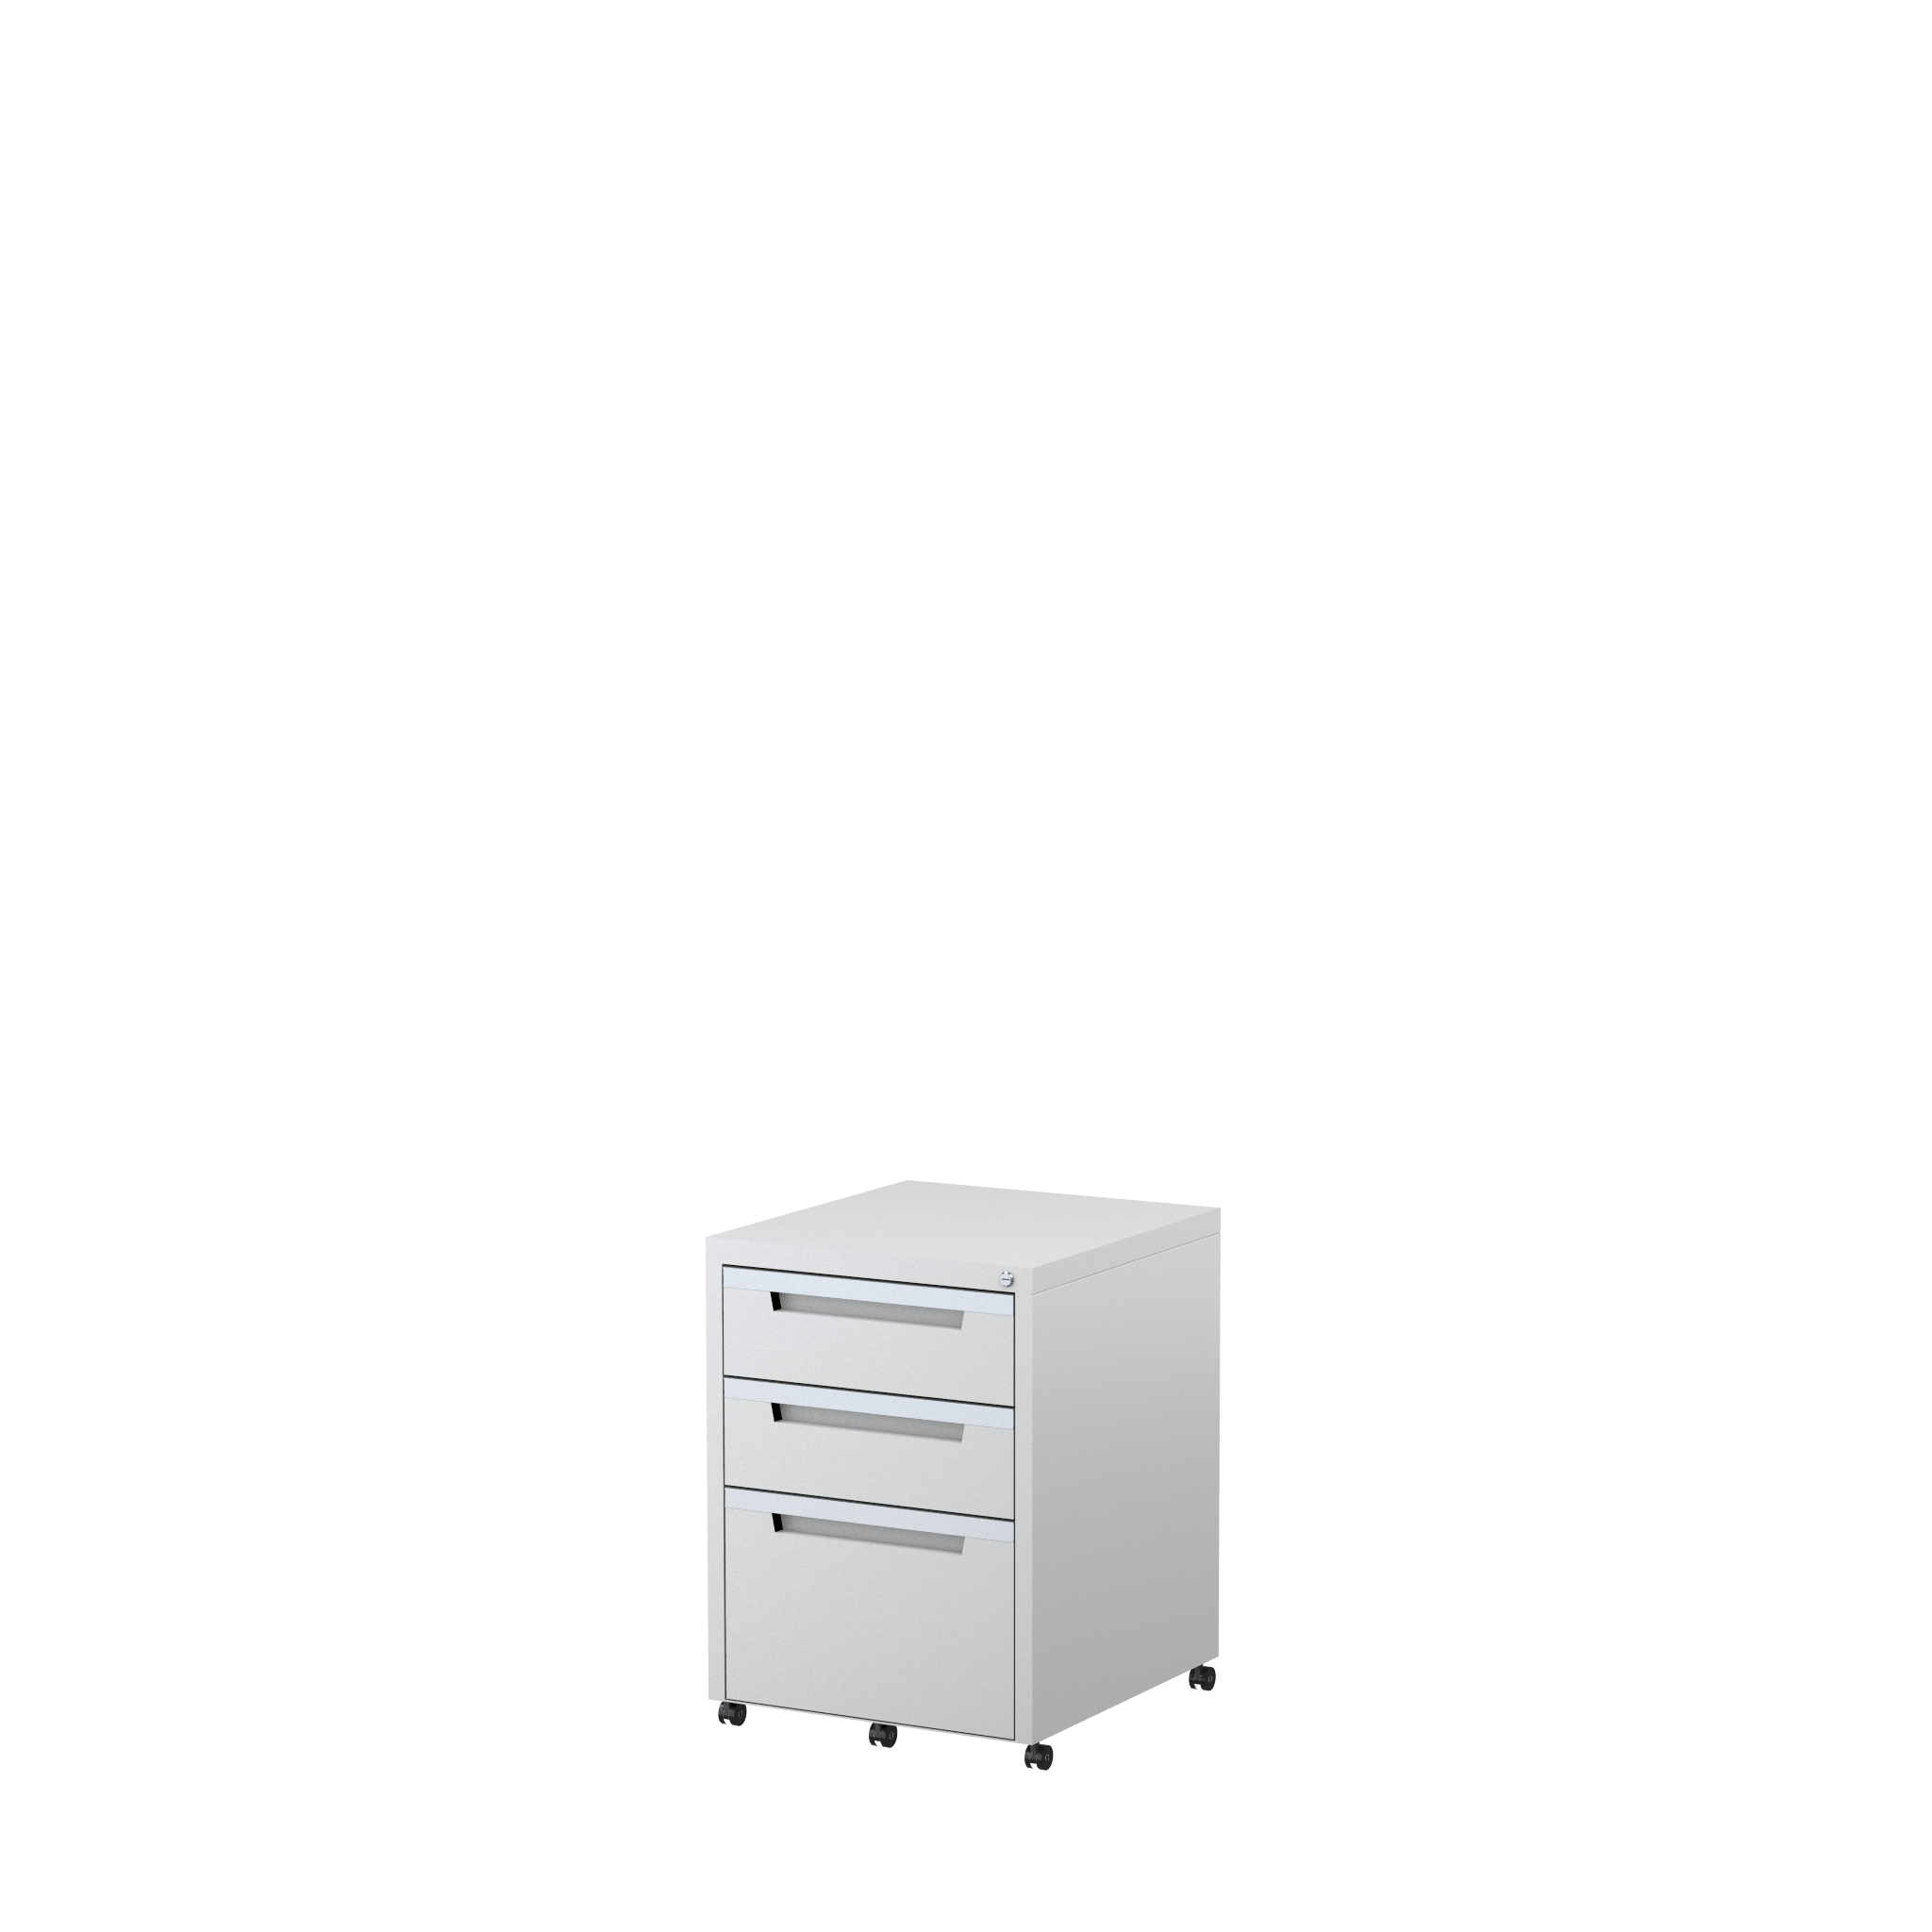 MP2B1F - STEELCO Mobile Pedestal BBF 630H x 470W x 515D-WS.png